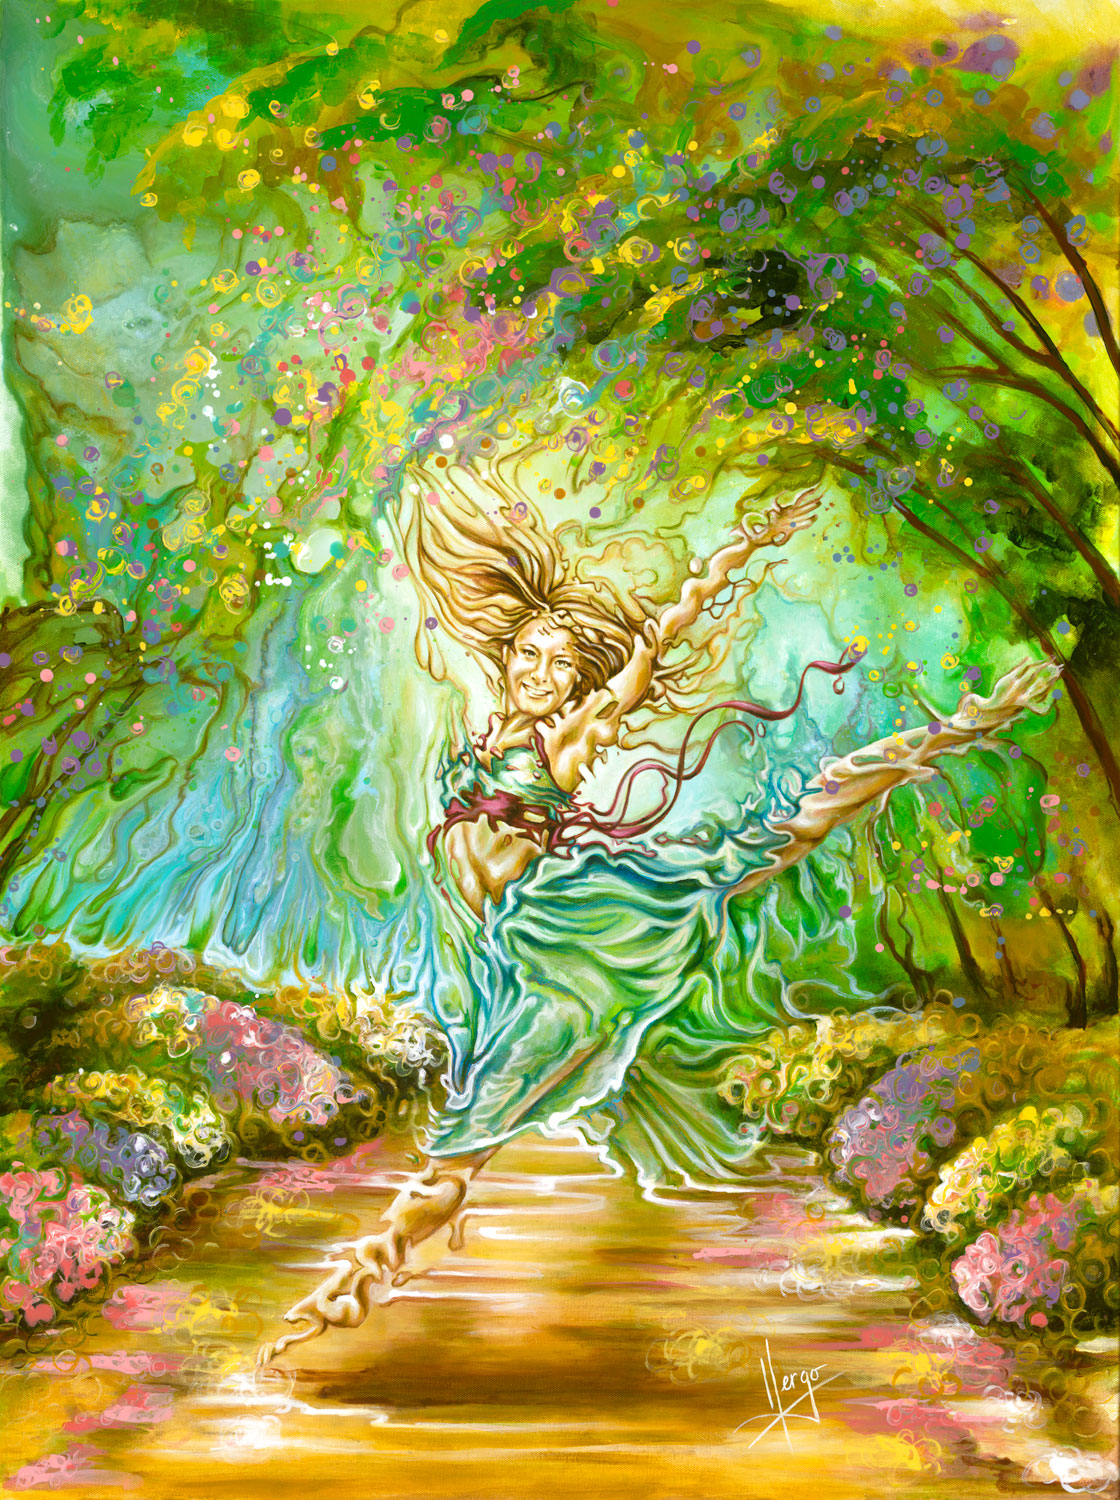 "Joy" colorful painting of a woman dancing in a Spring landscape